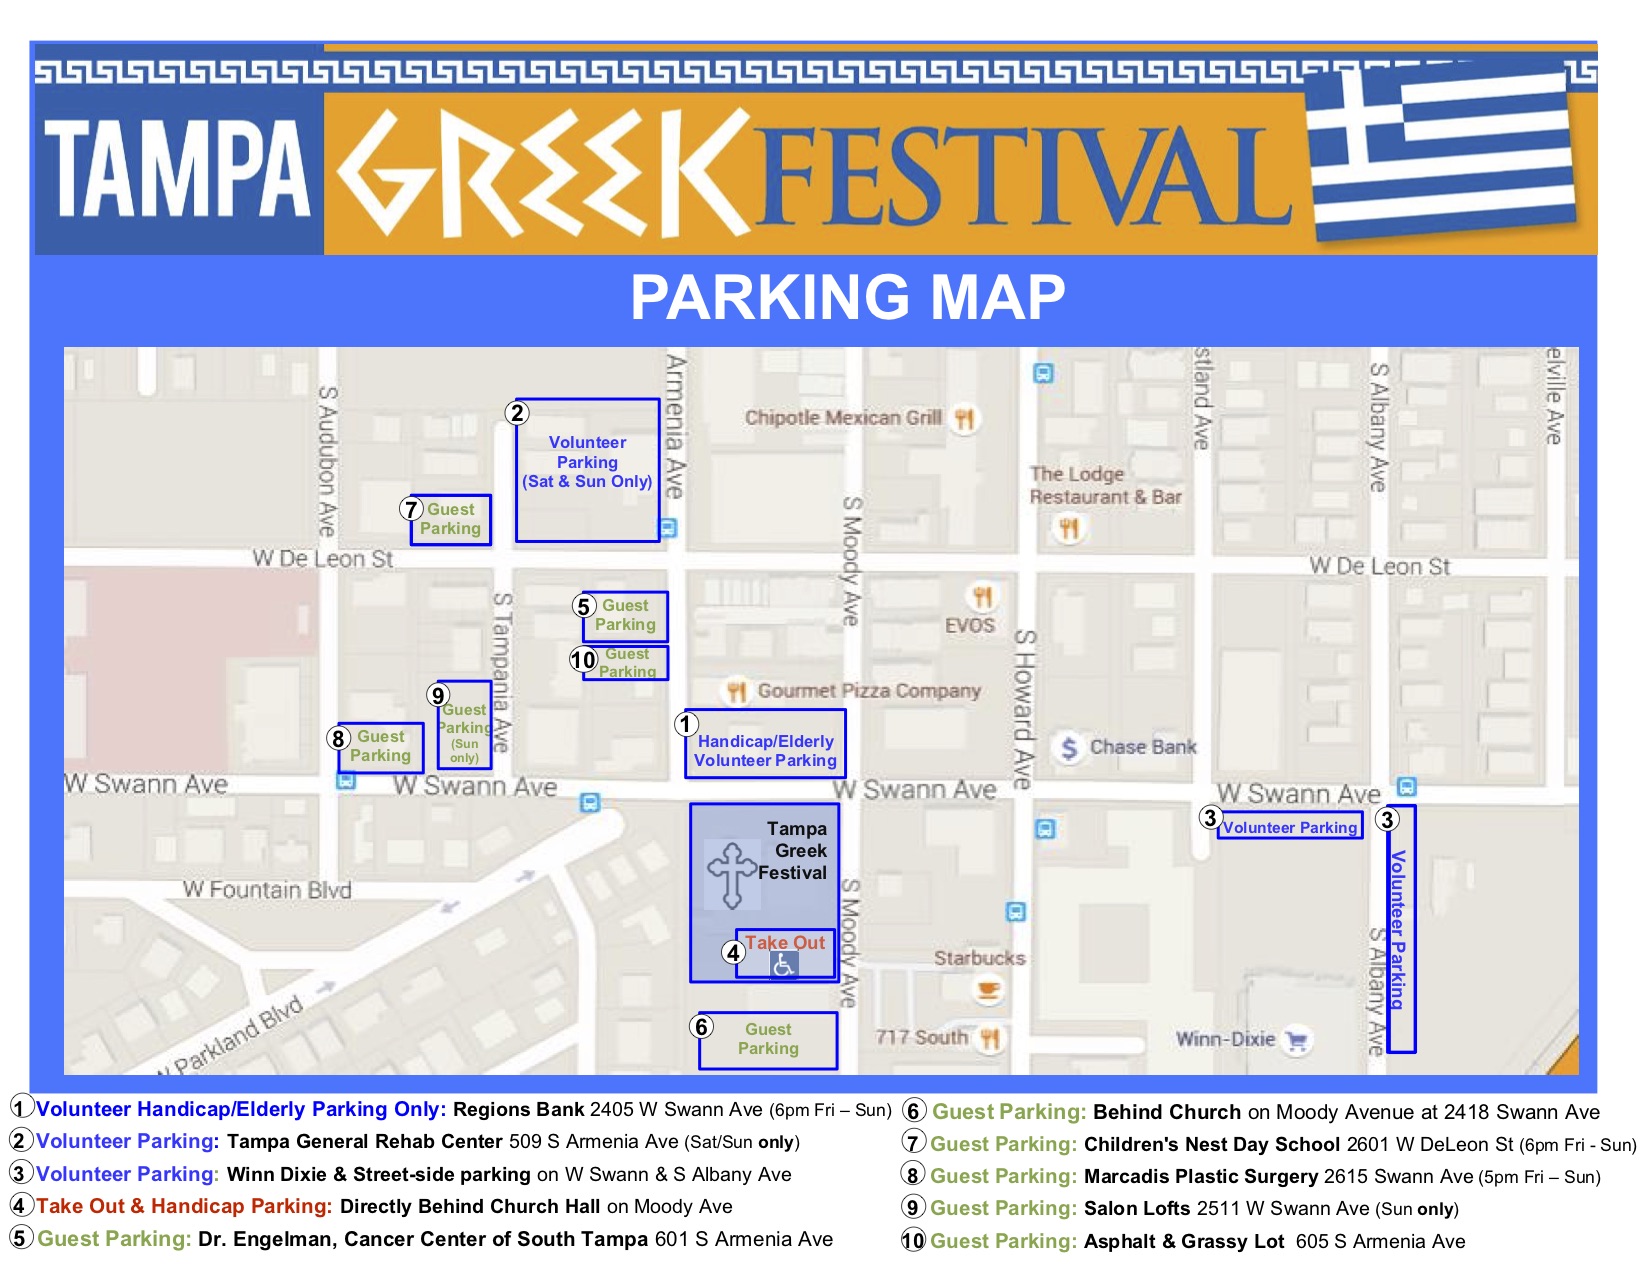 ABOUT Tampa Greek Festival